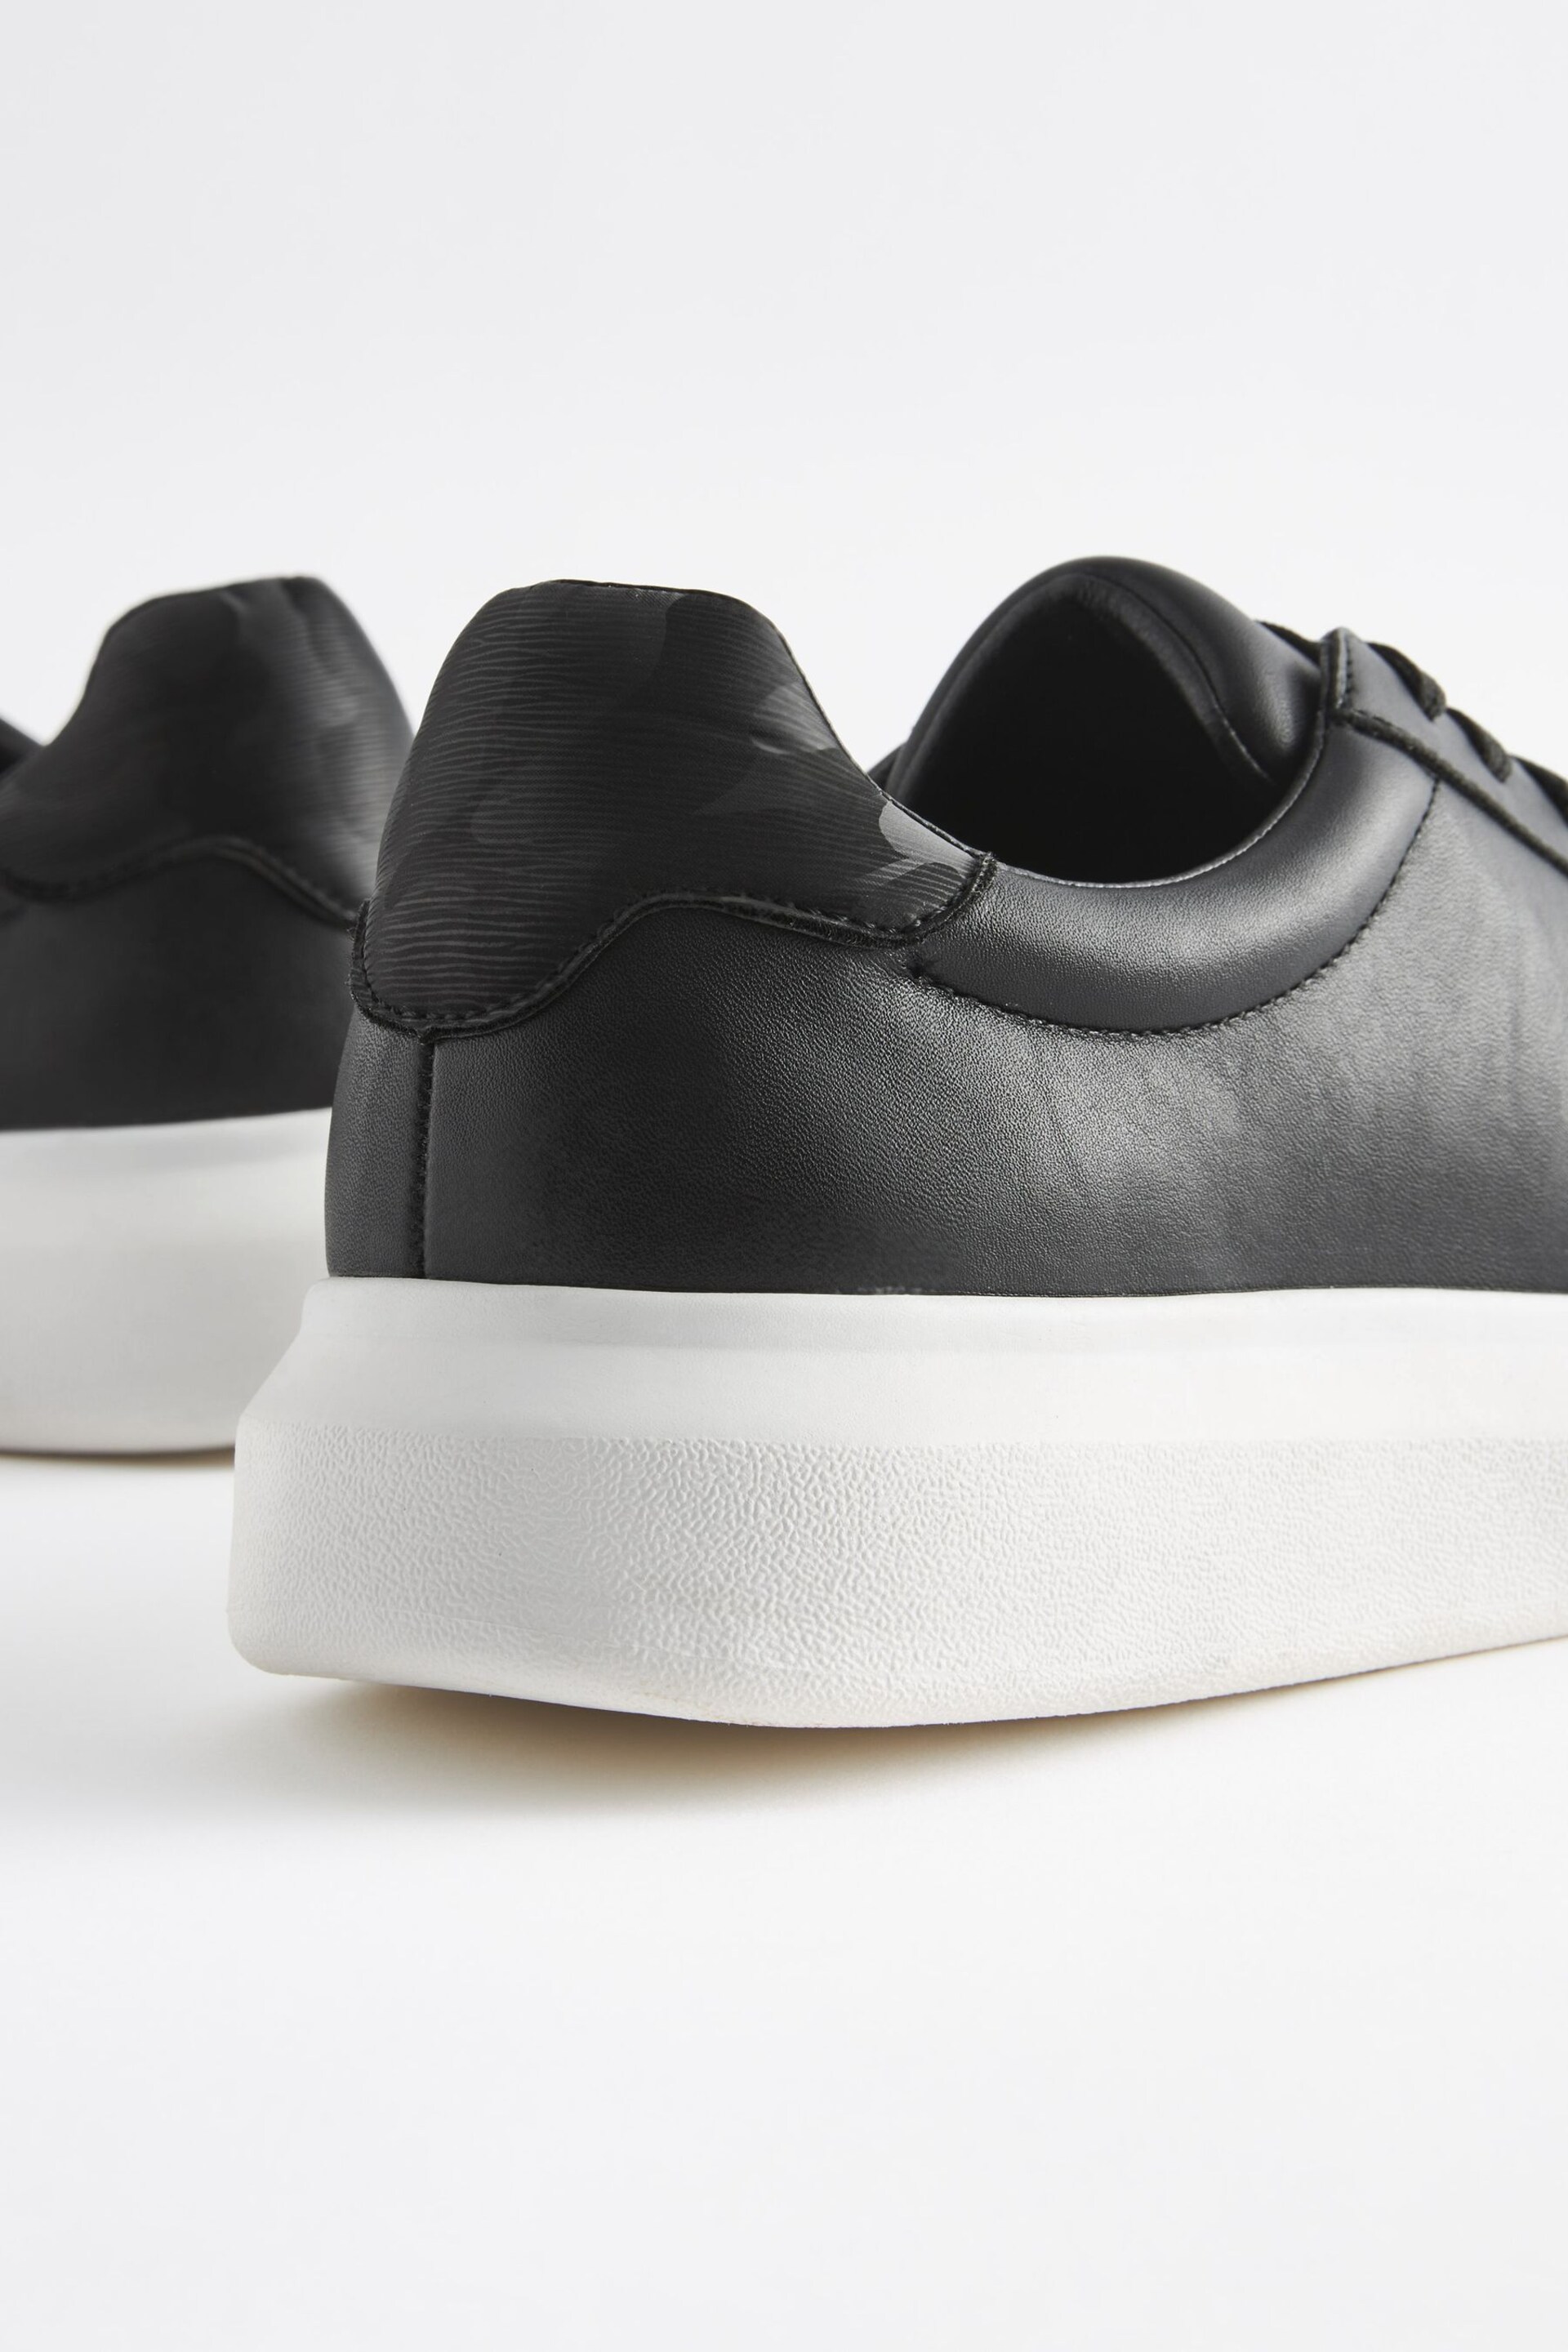 Black EDIT Chunky Trainers - Image 6 of 6